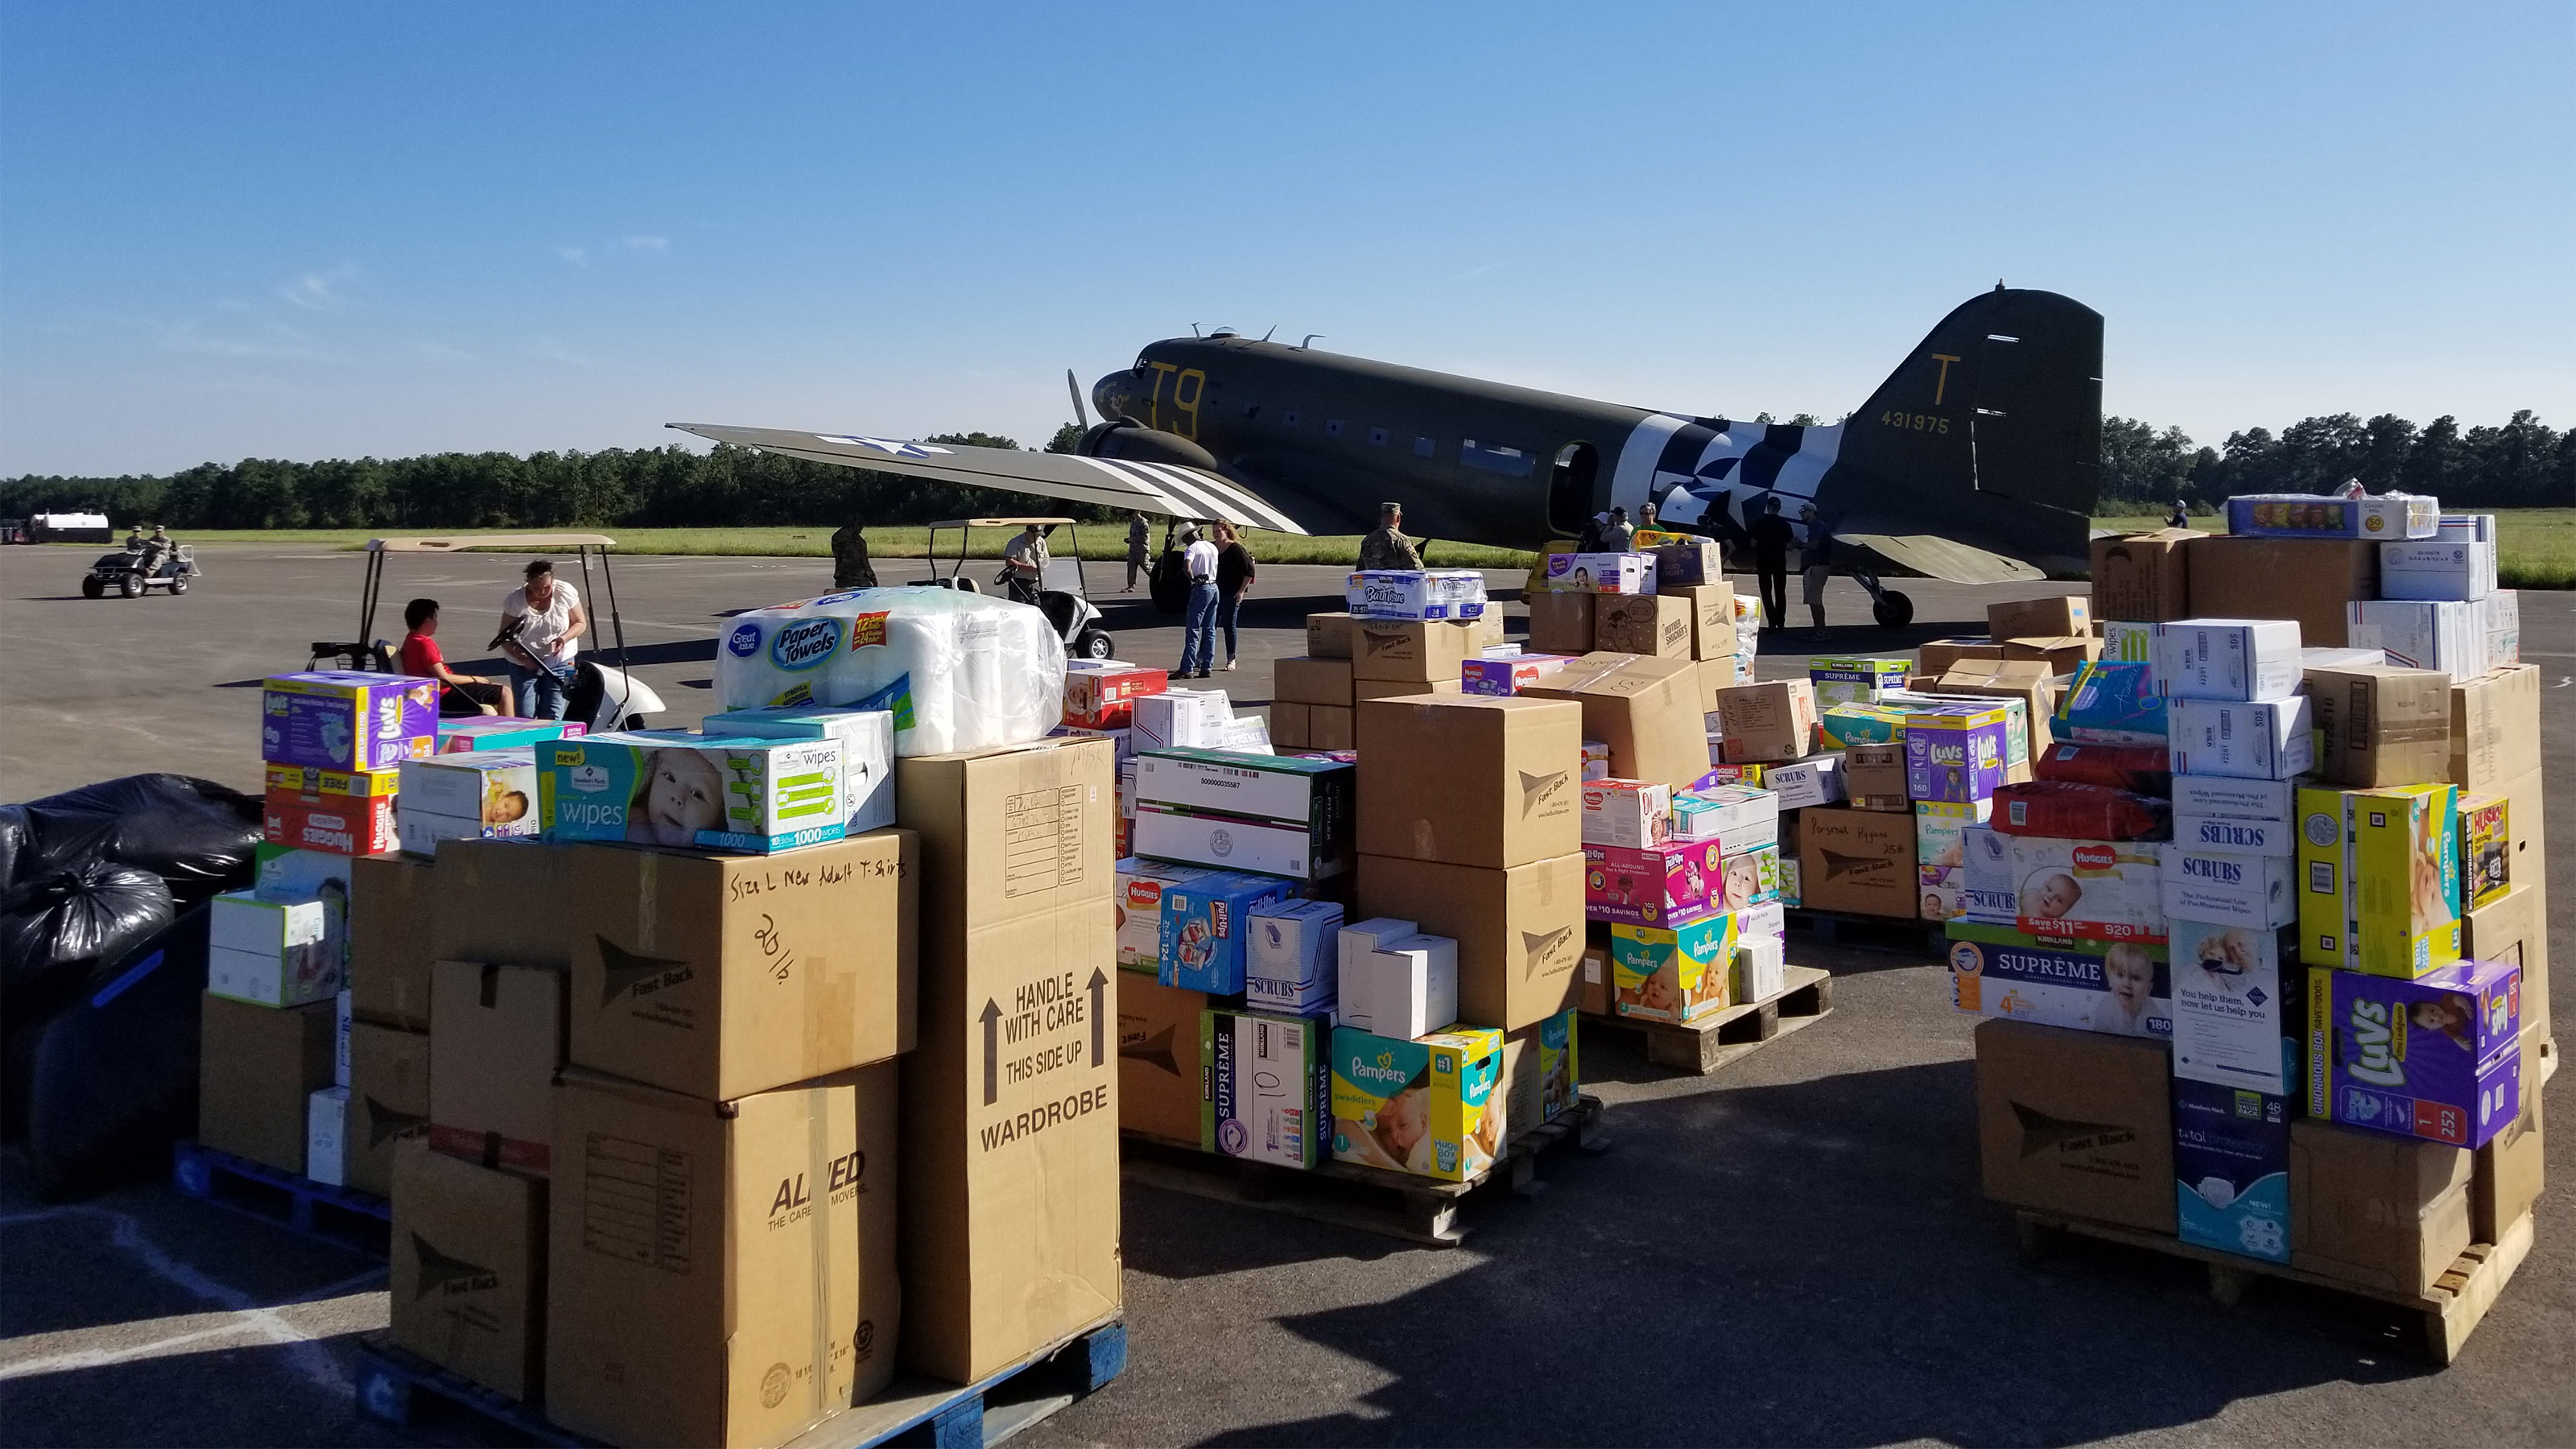 Members of the Texas Army National Guard 3rd Battalion, 141st Infantry regiment coordinate aircraft and distribution of supplies to the local area surrounding Hawthorne Field Airport (45R) in Kountze, Texas. Photo courtesy of Sgt. Eric Madore.